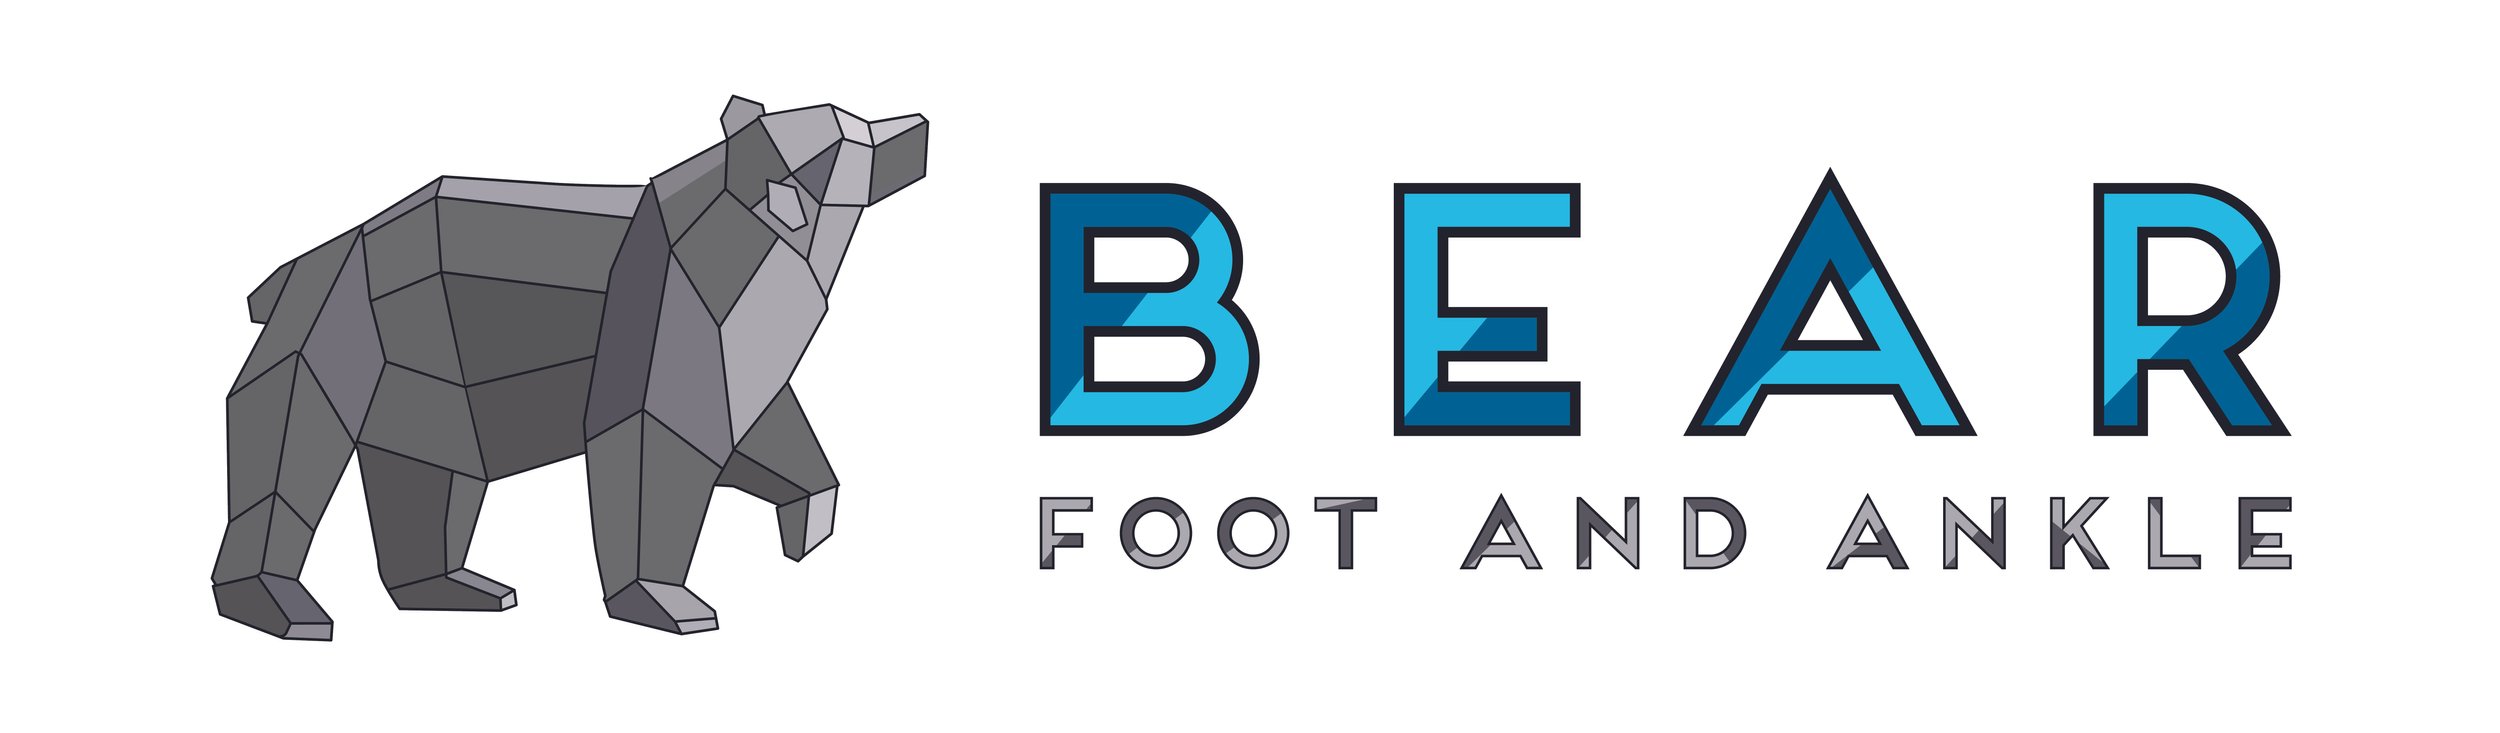 Bear Foot and Ankle - Podiatrists Podiatric Surgeons